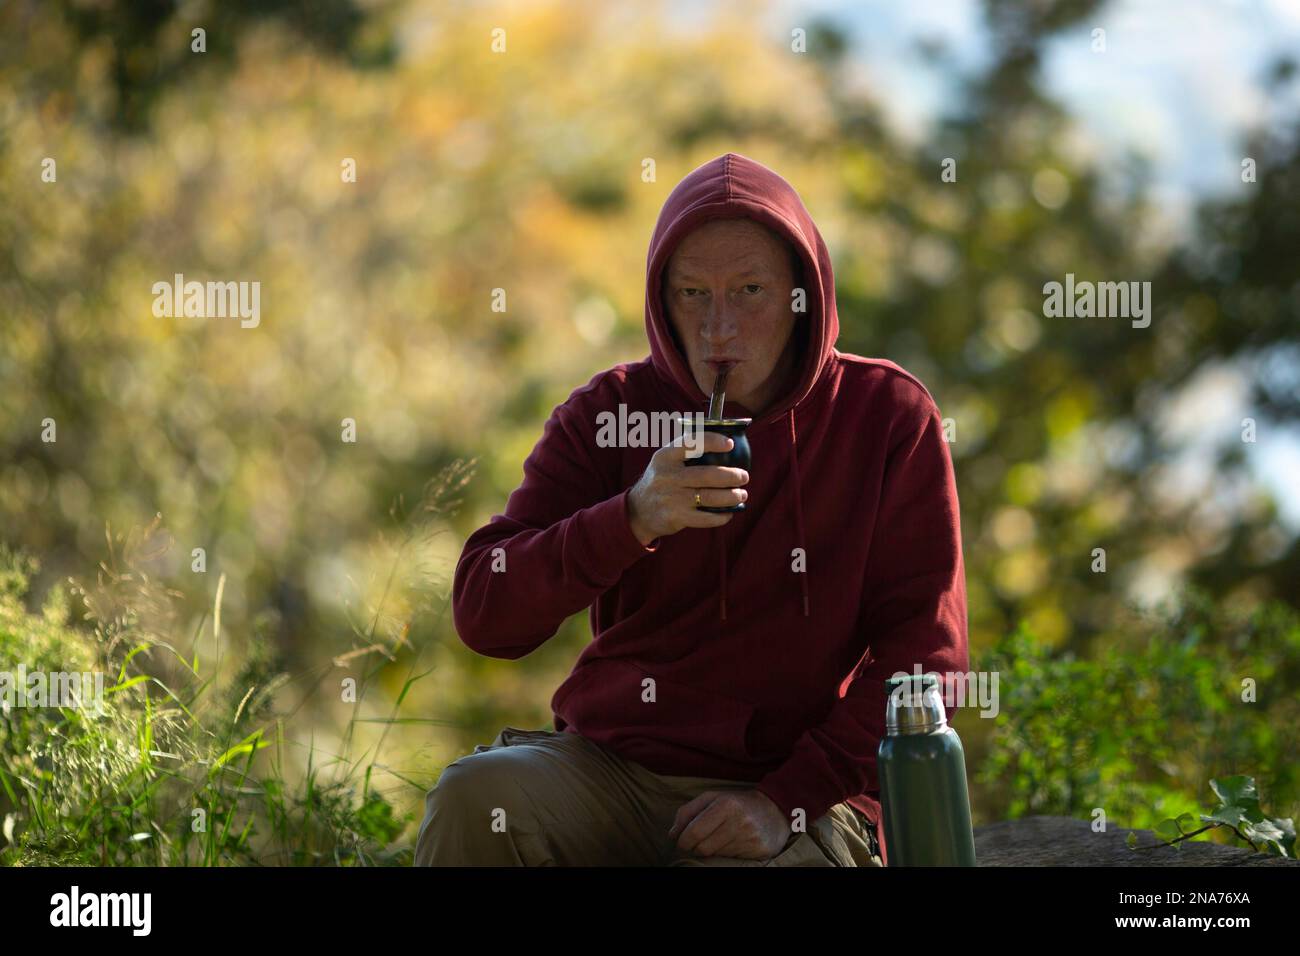 A man drinks mate from a mate mug in the park. Stock Photo